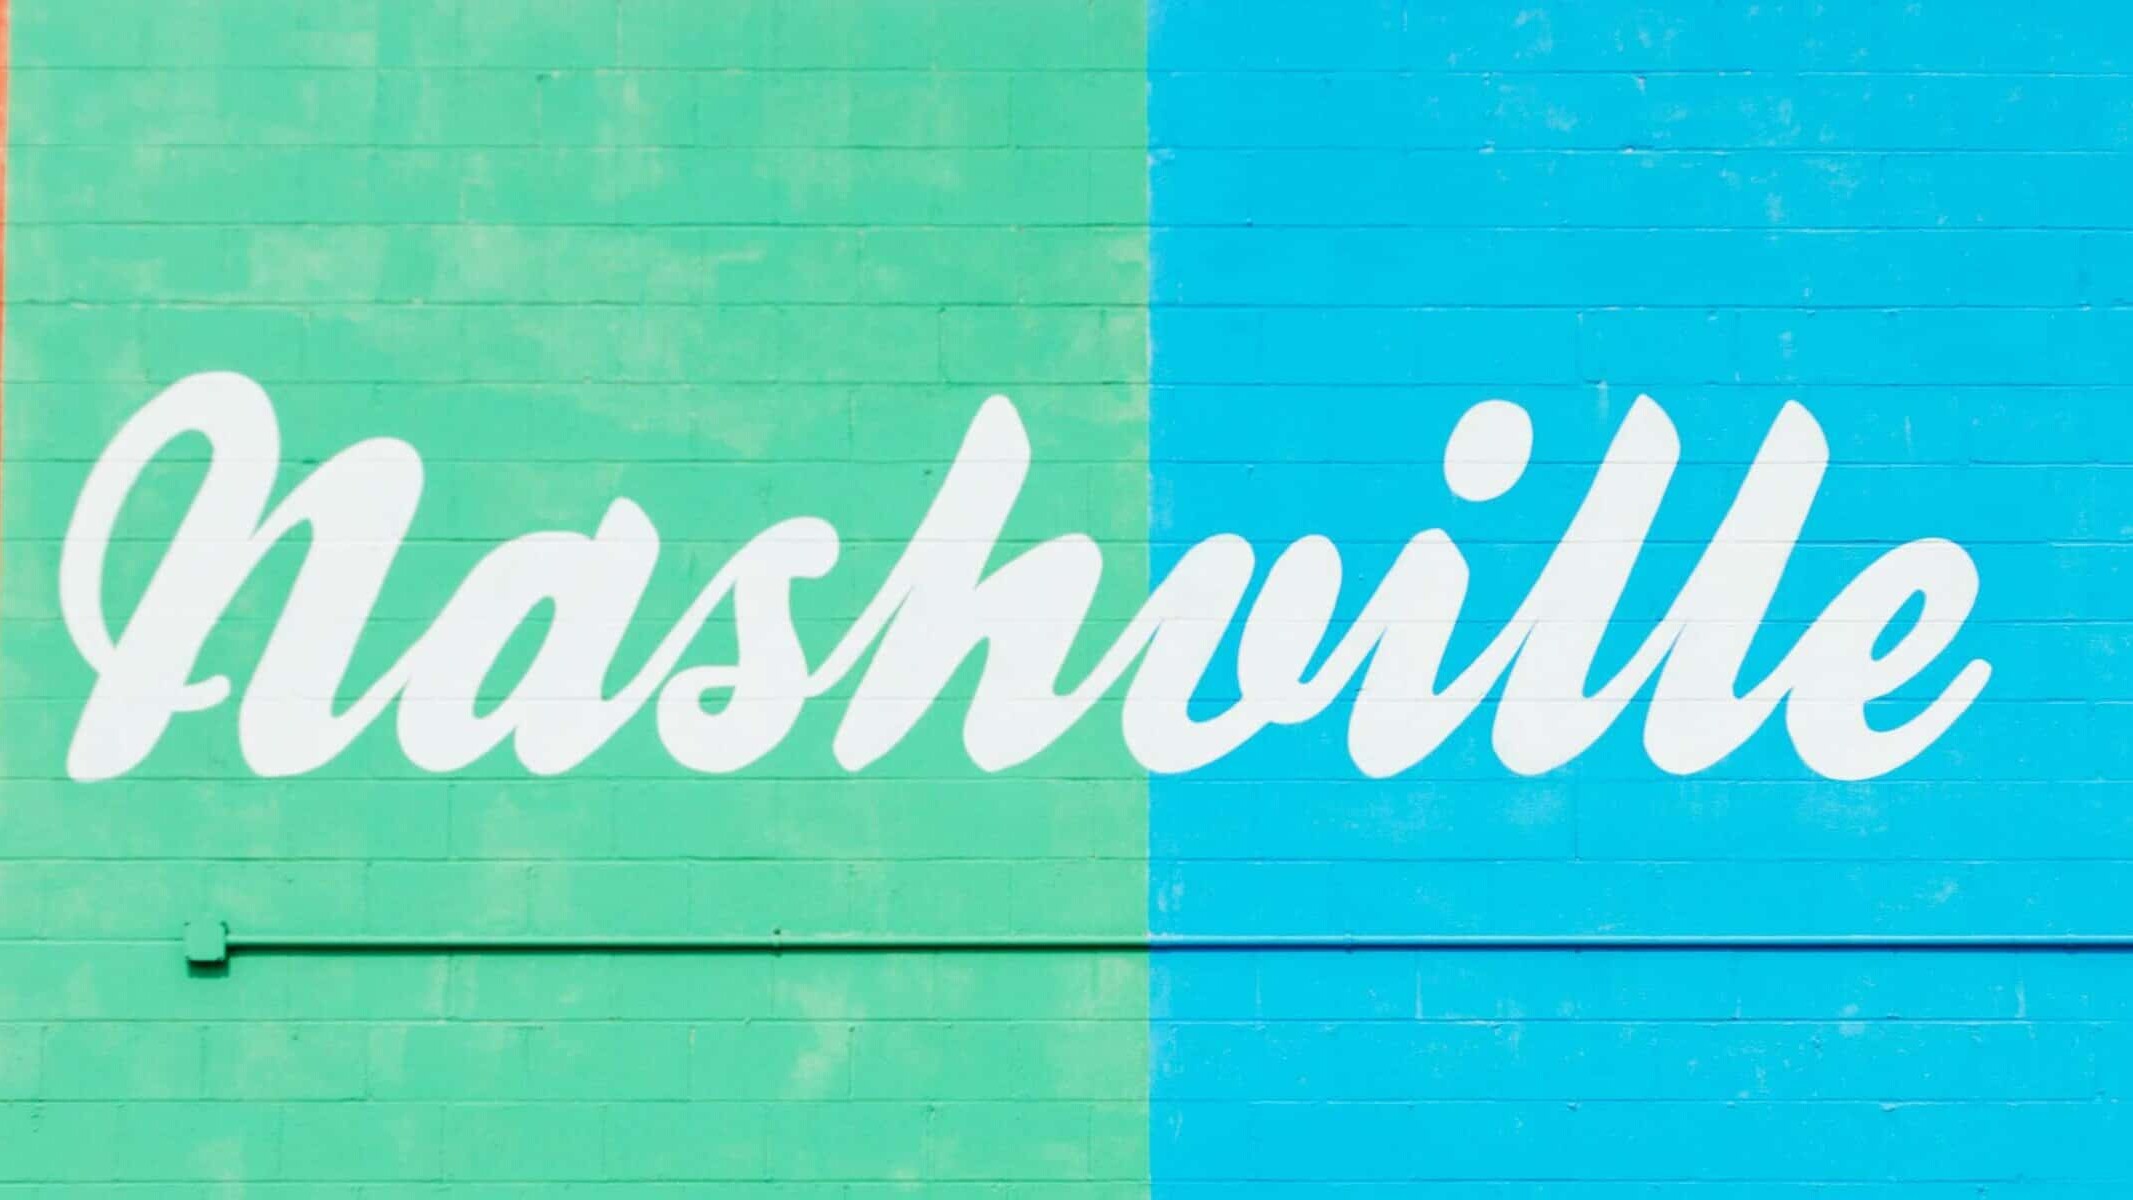 A mural in Nashville with a beautiful colorful background